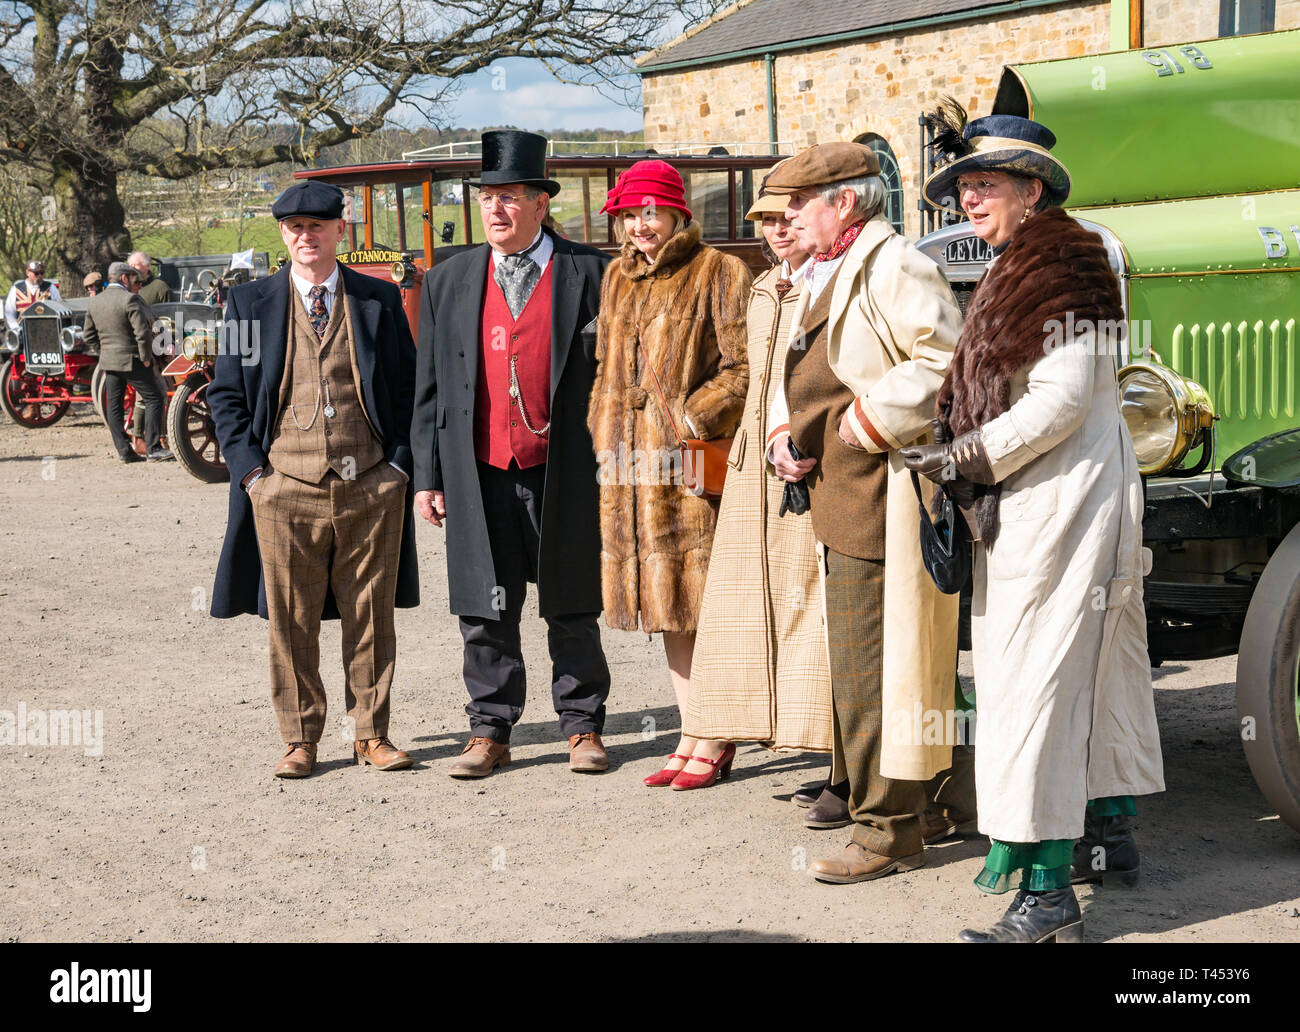 Beamish Museum, Beamish, Durham County, England, United Kingdom, 13 April 2019. Beamish Steam Day: tPeople dressed in vintage style costumes pose in front of a vintage 1921 Leyland charabus vehicle on display at Beamish Living Museum Stock Photo